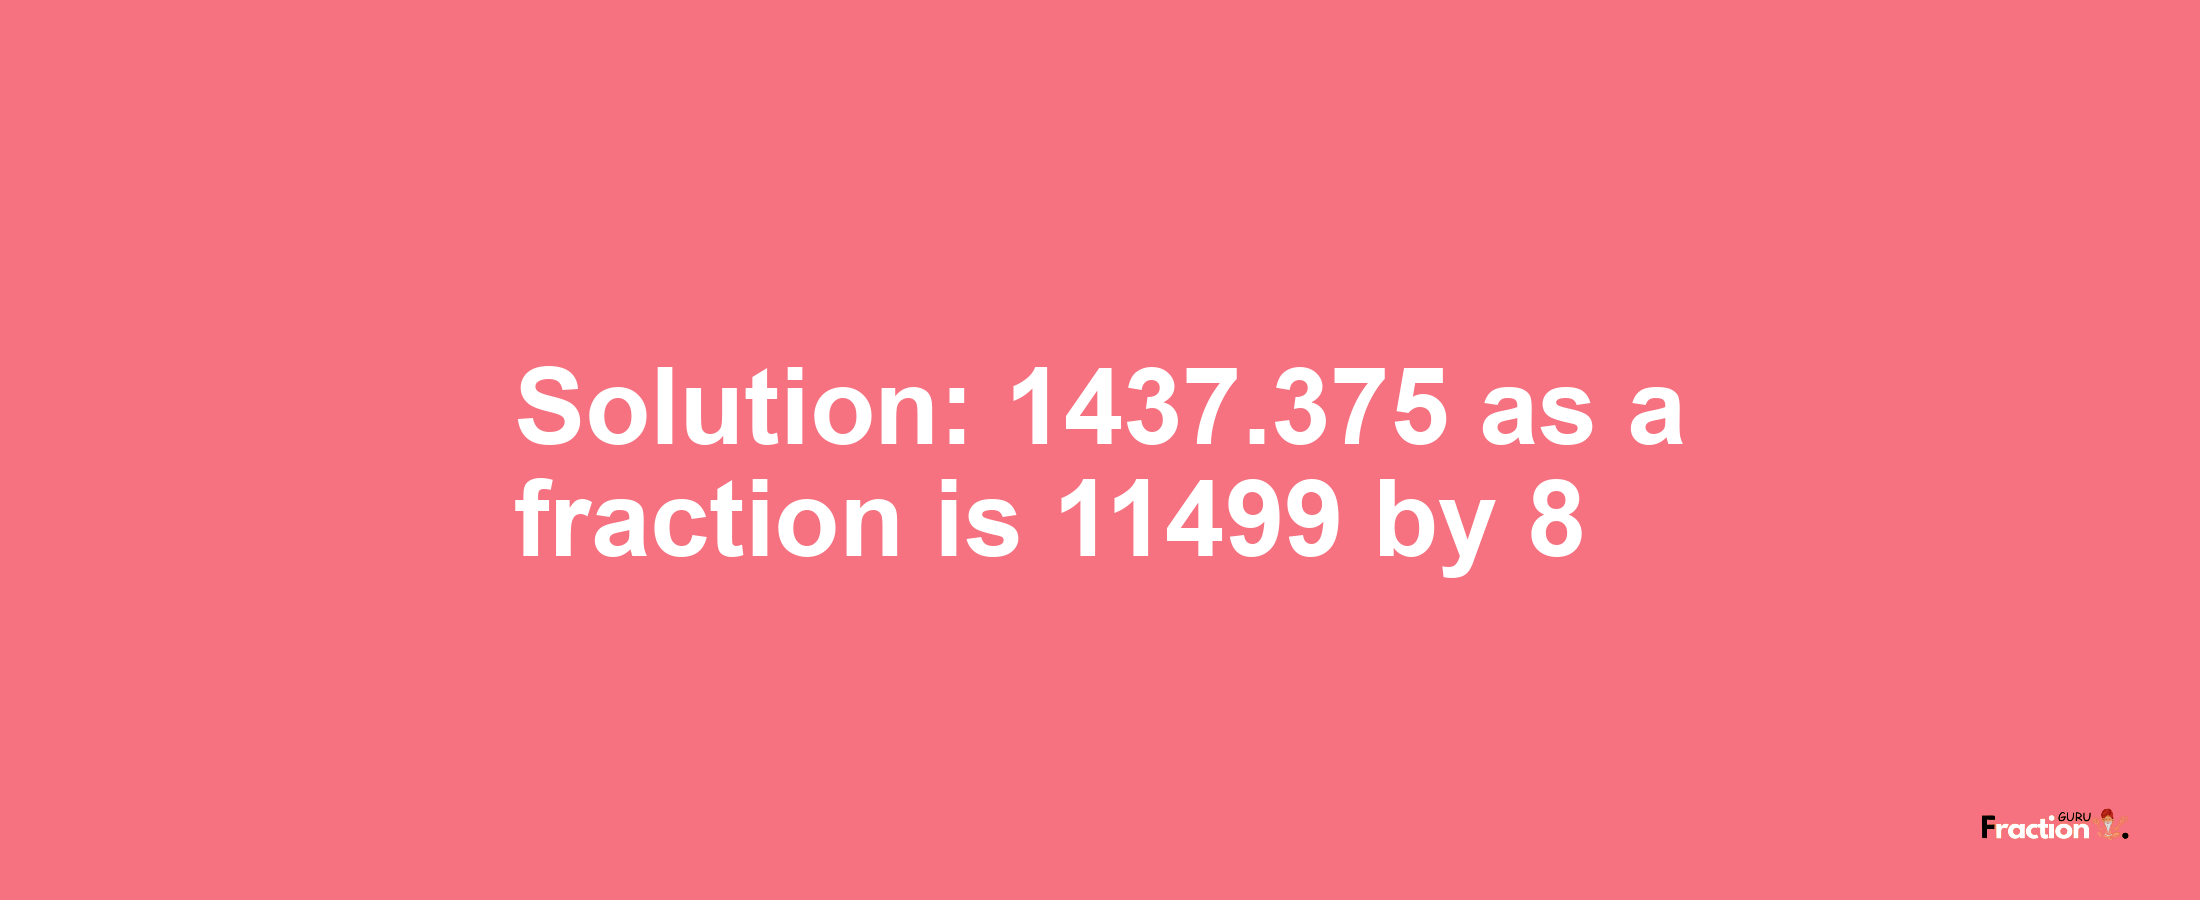 Solution:1437.375 as a fraction is 11499/8